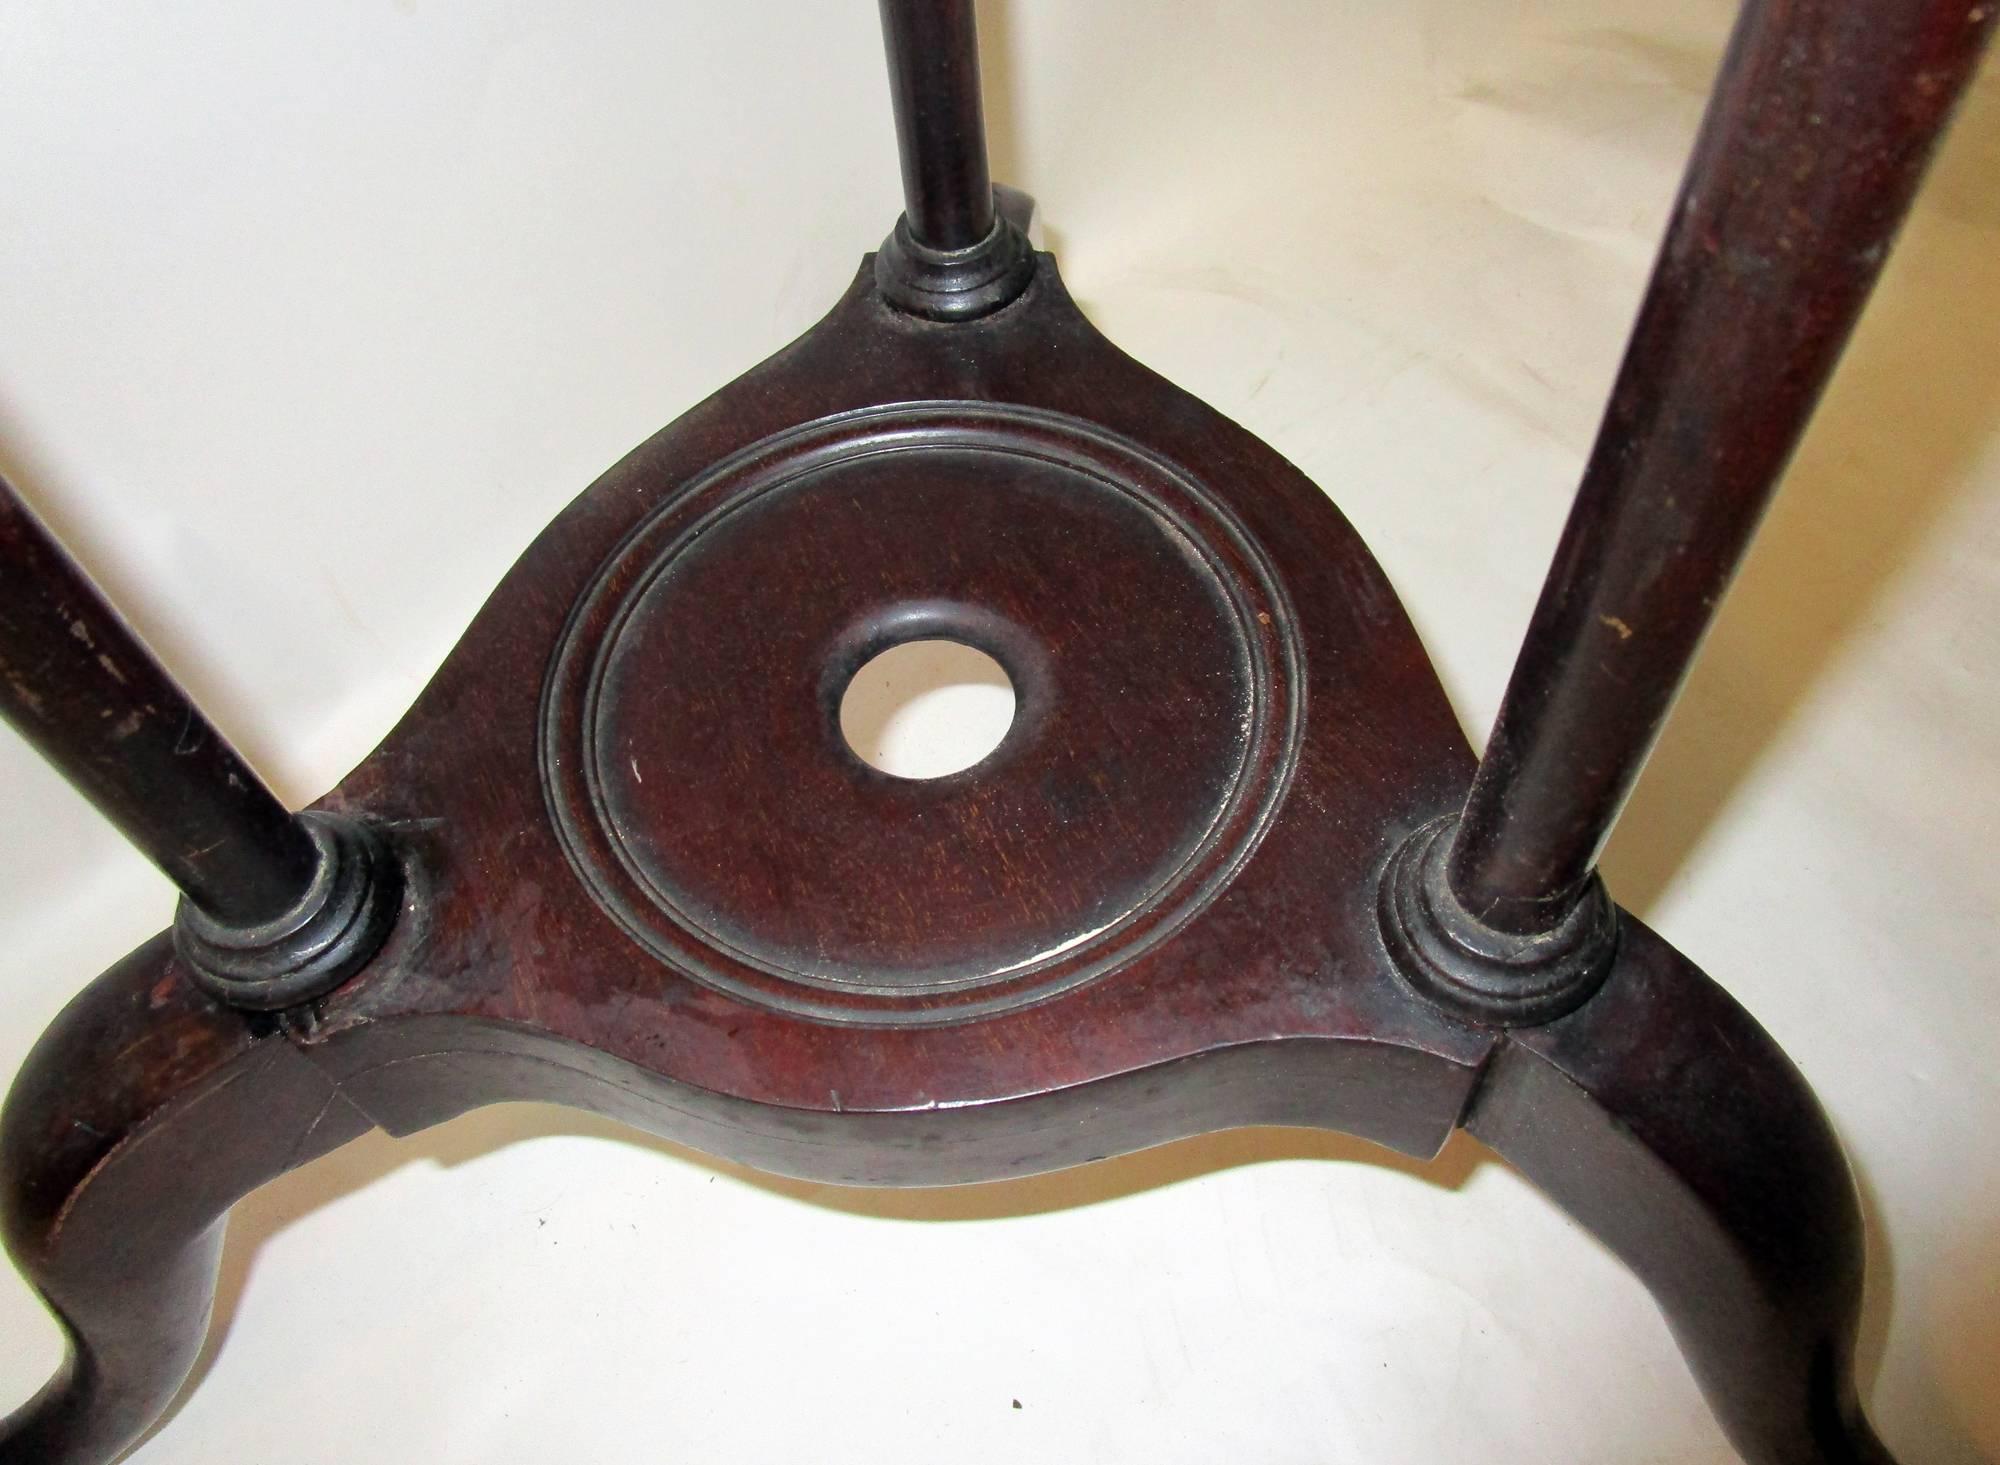 Georgian period English mahogany tripod pedestal featuring splayed legs with snake feet.
The width of the splayed legs is 19.50 inches the width of the top is 12.50 inches across circle.